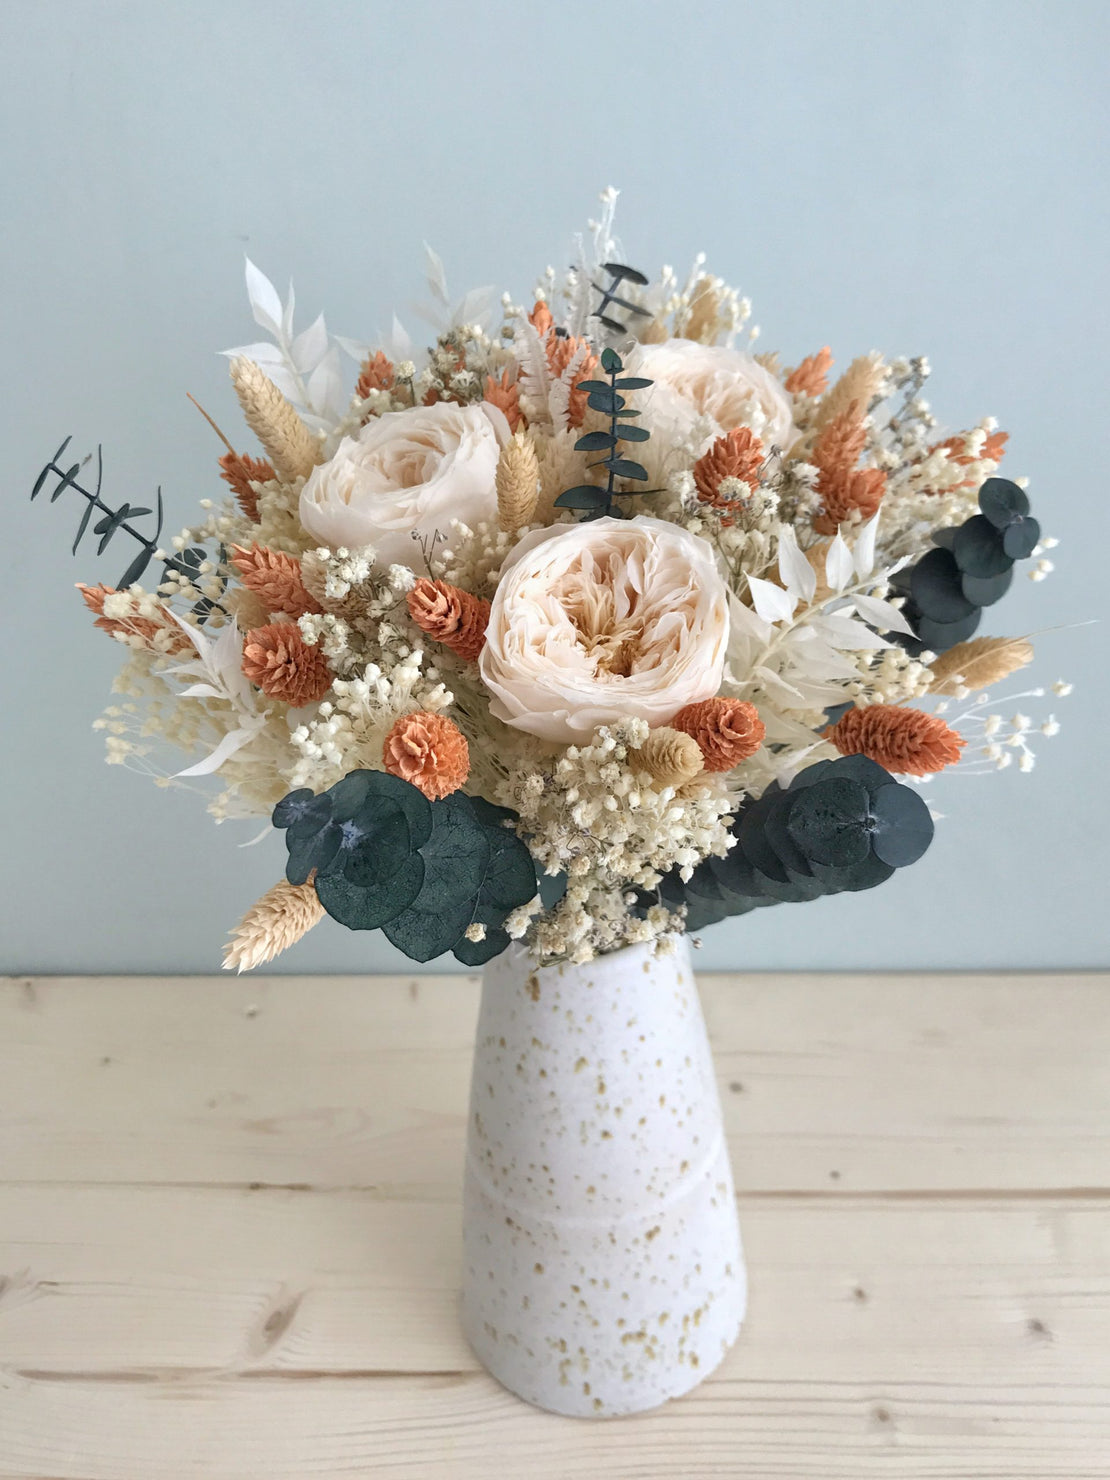 Bouquet of dried and preserved flowers, with eternal powder pink English roses and eucalyptus - 